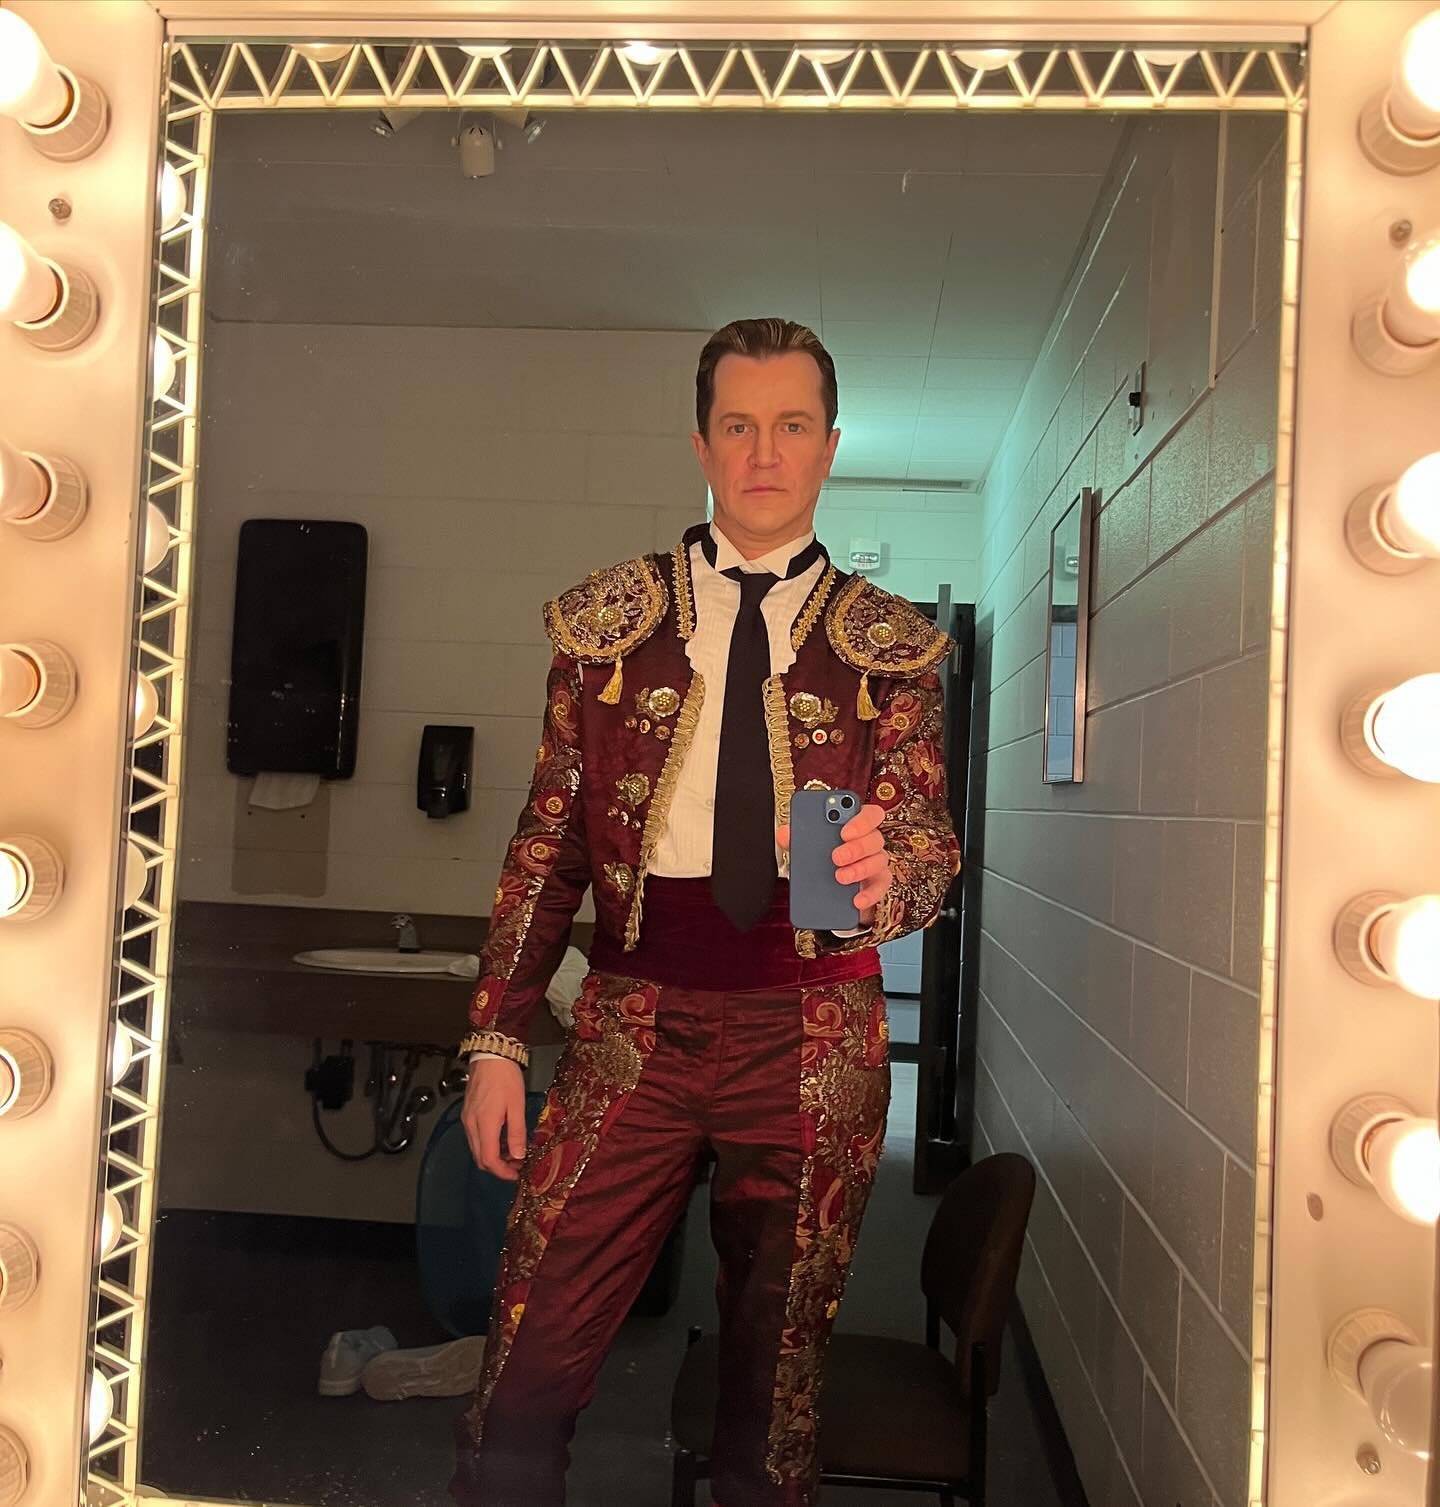 Who says Toreadors can&rsquo;t be blond-ish? 

Also&hellip;how do they fight bulls in pants this tight? Did spain invent spandex?
@manitobaopera #carmen #opera #toreador #operasingersofinstagram #baritone #classicalmusic #bizet